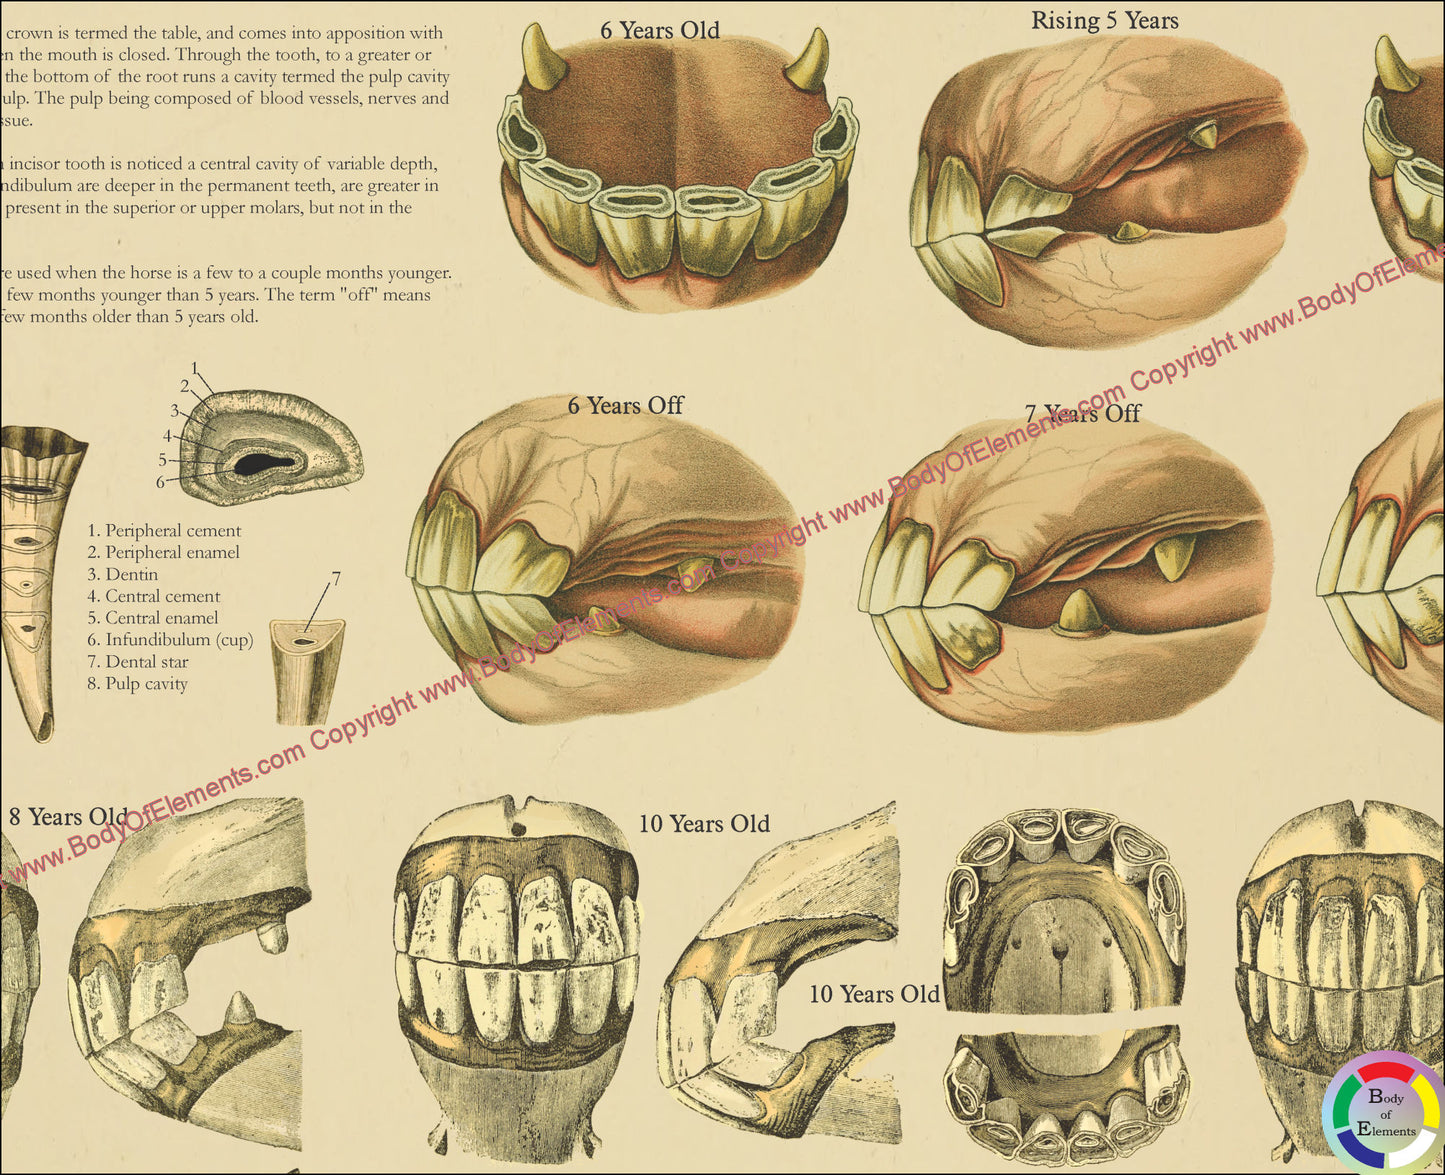 Anatomy of the equine tooth and age by wear